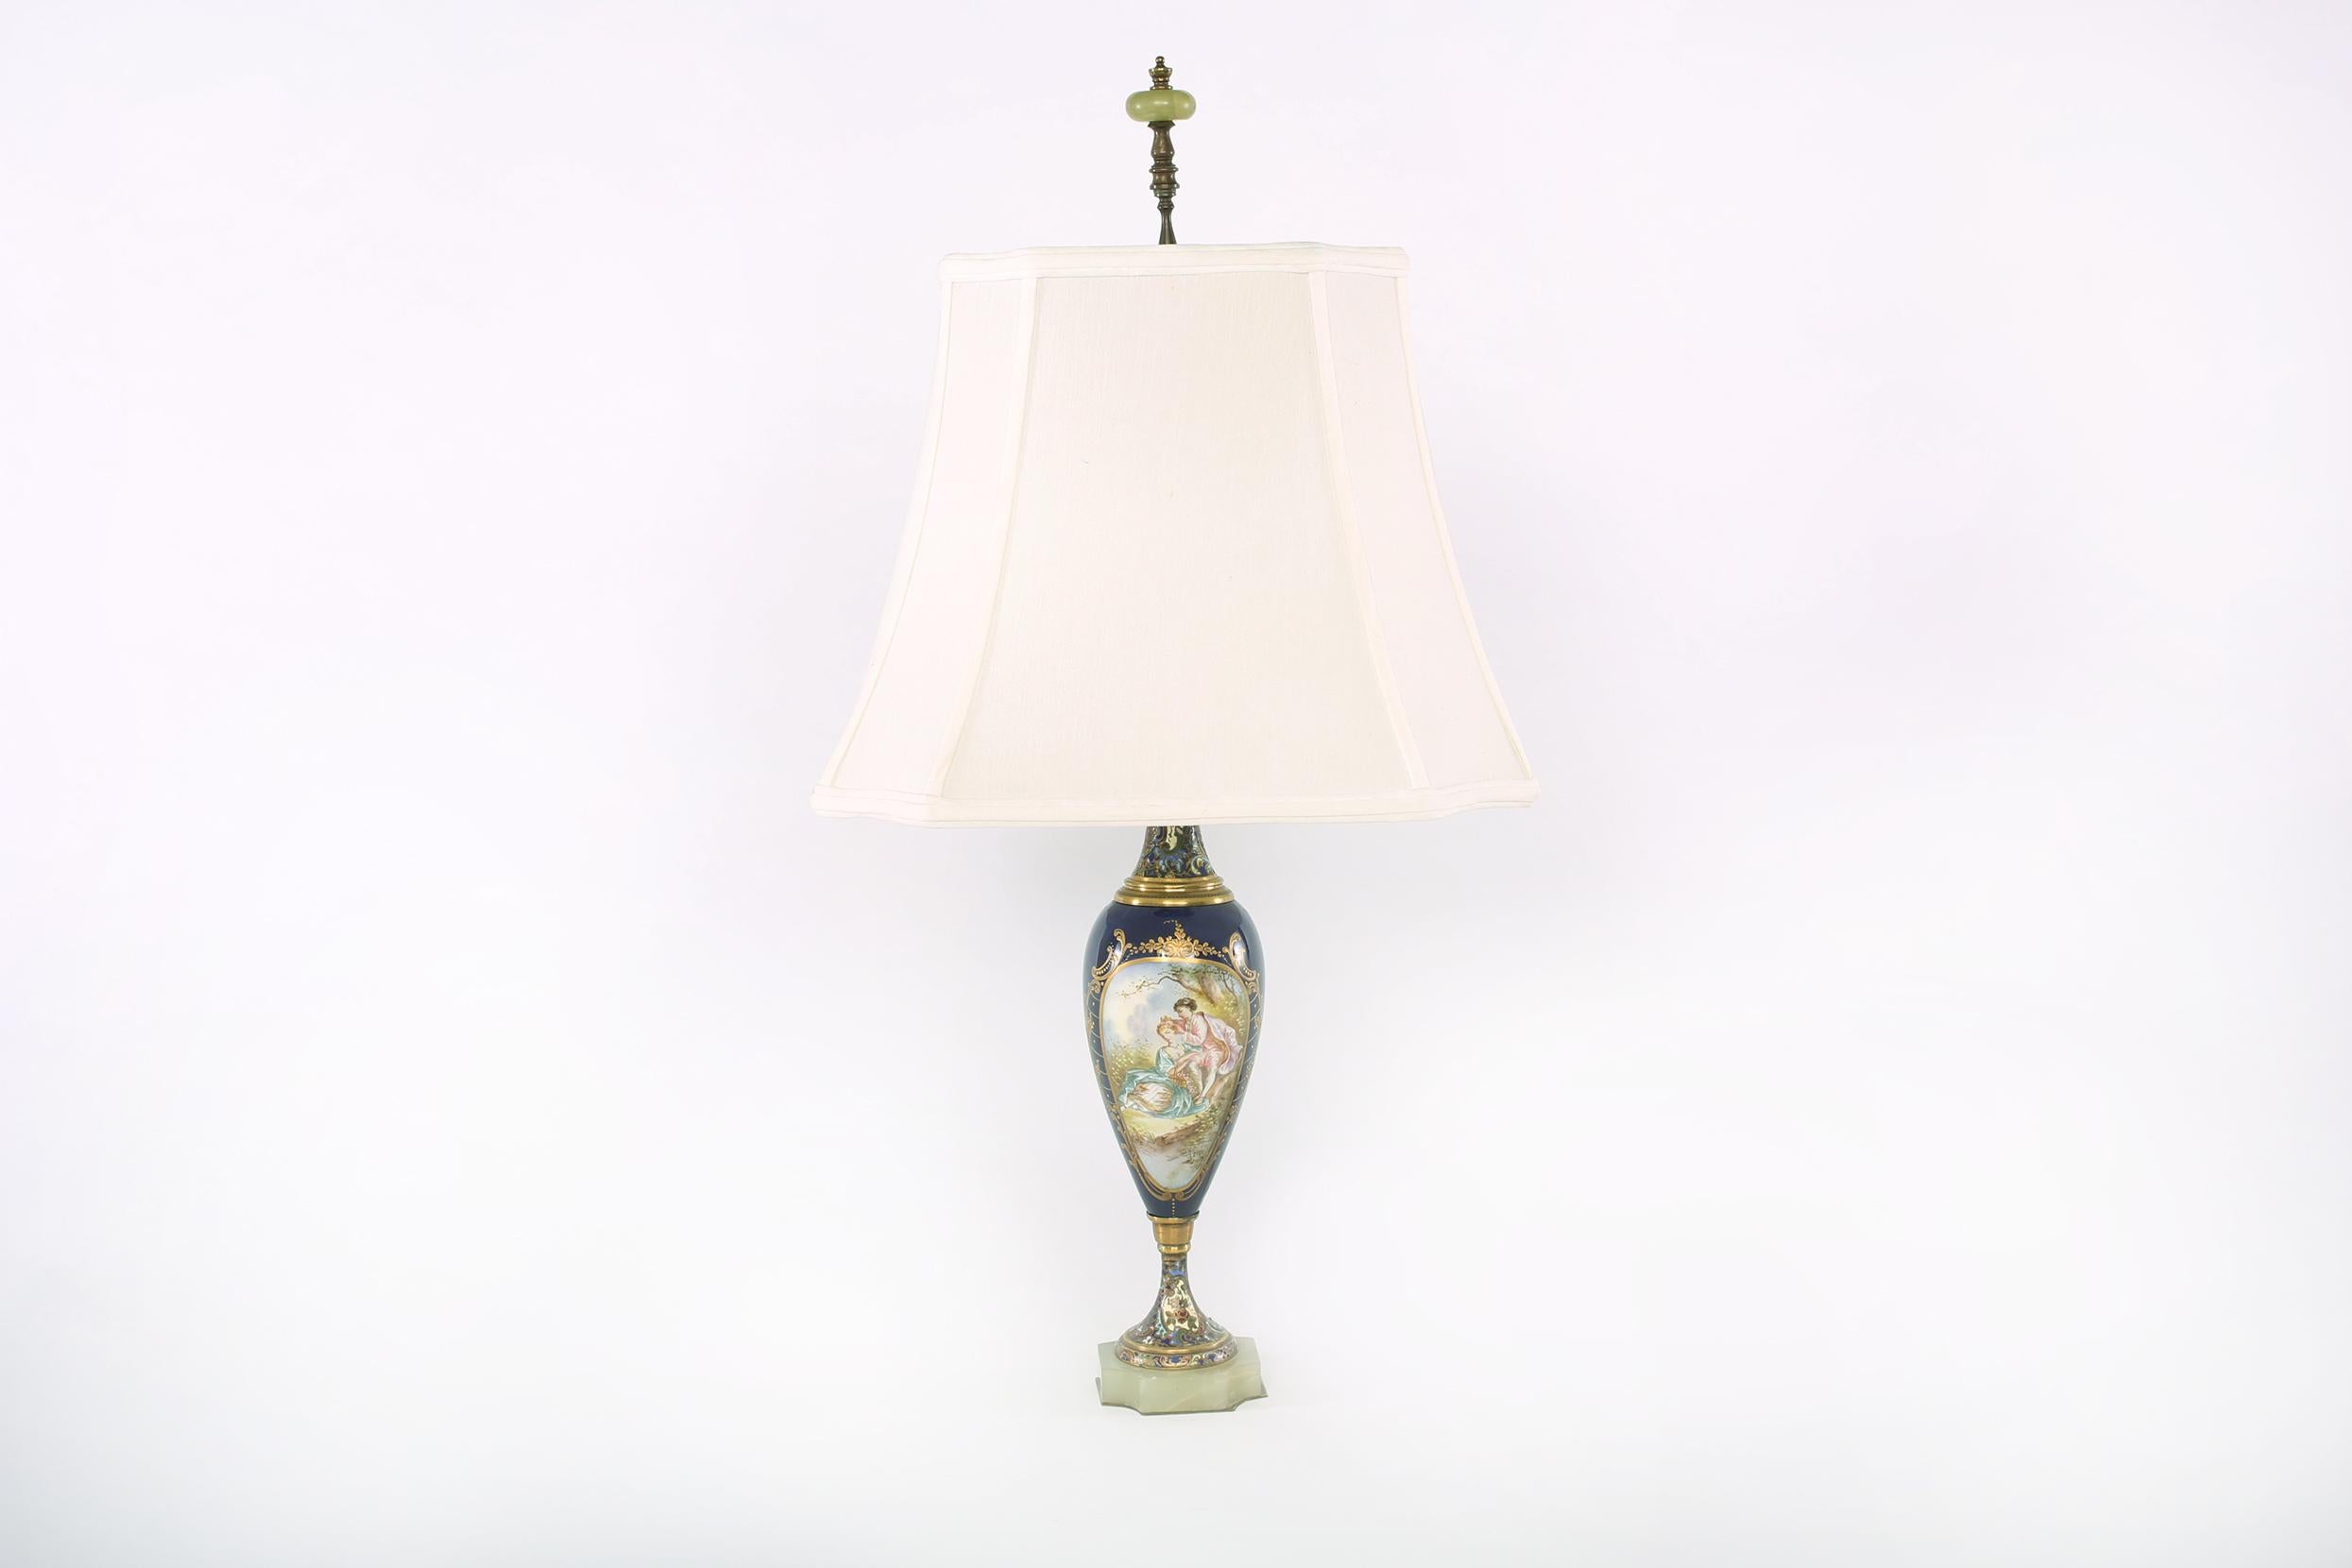 Sèvres style with gilt metal mounted porcelain urns shape pair table lamps over a canted square onyx base, with exuberantly painted design details and foliate motifs. Each lamp is in good working condition with appropriate wear consistent with age /